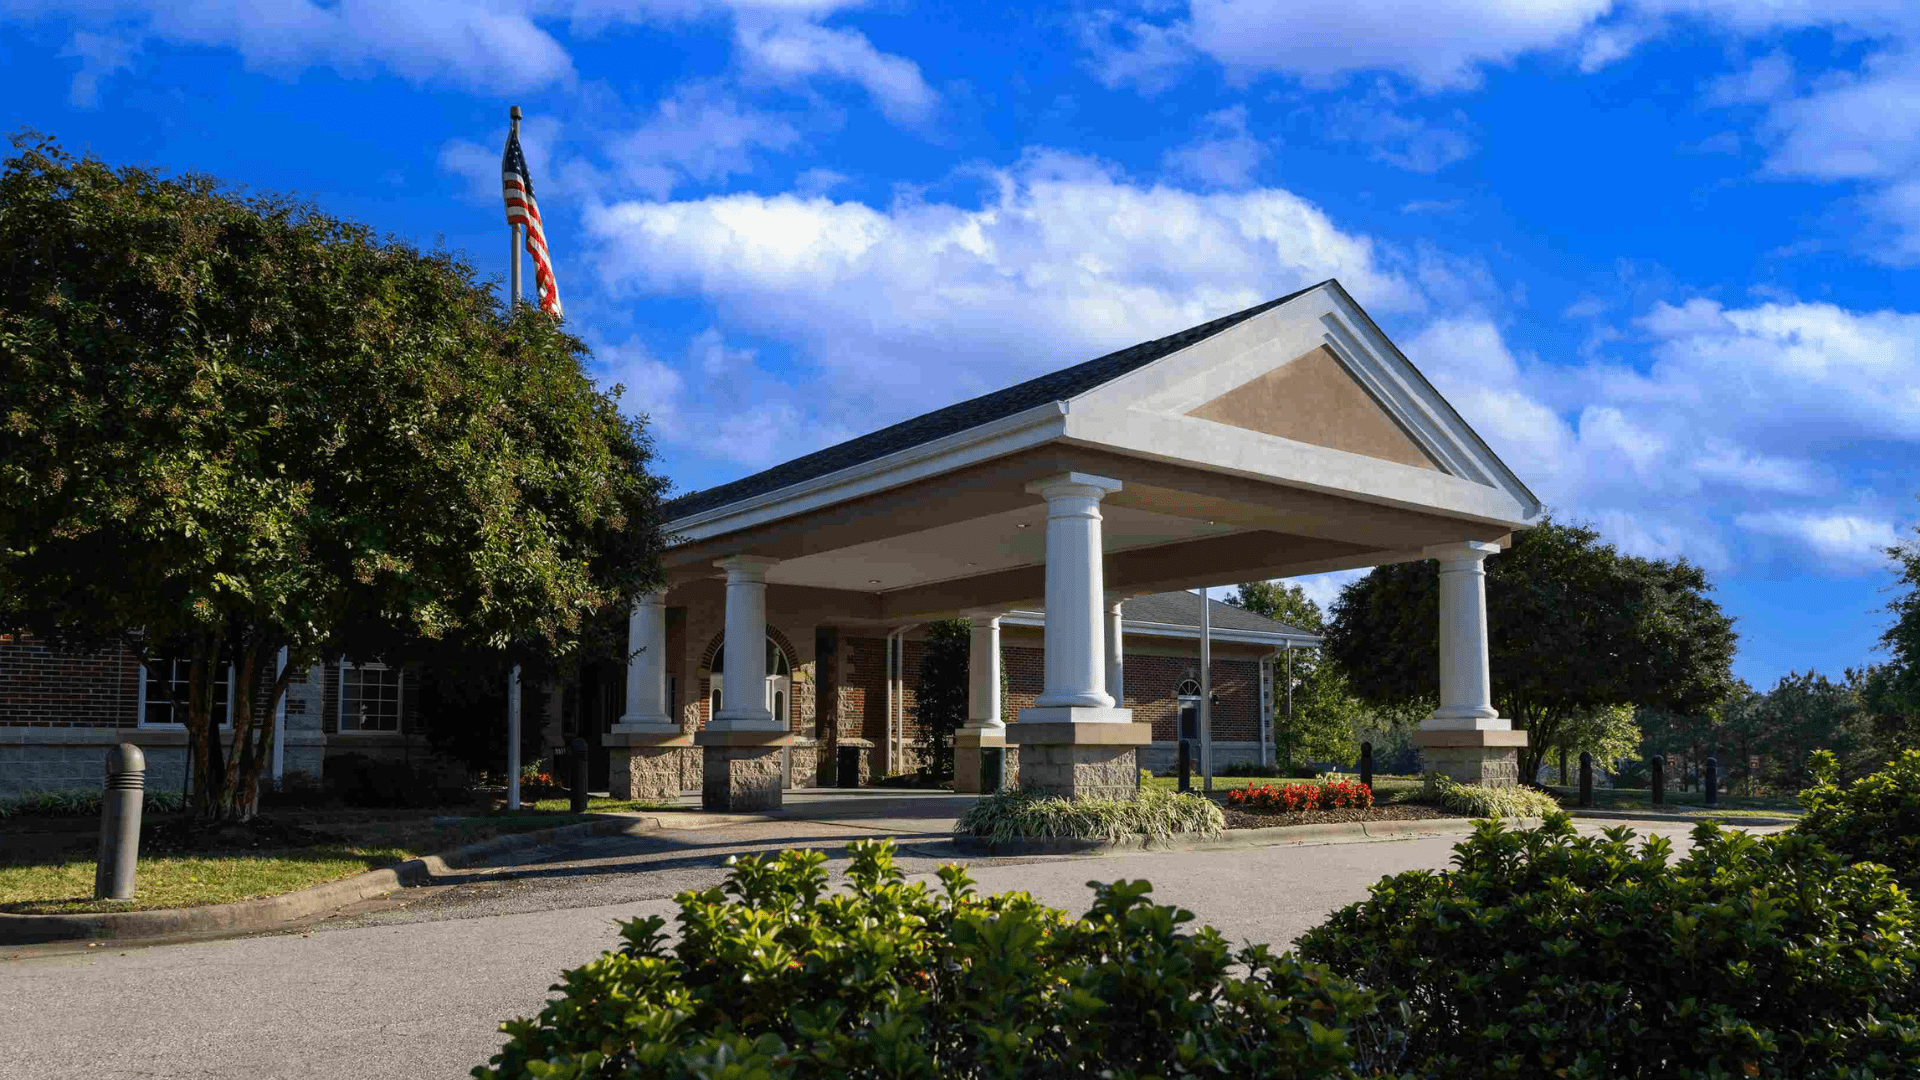 Entrance to Granville Primary Care with with an American Flag pole and greenery surrounding the entrance